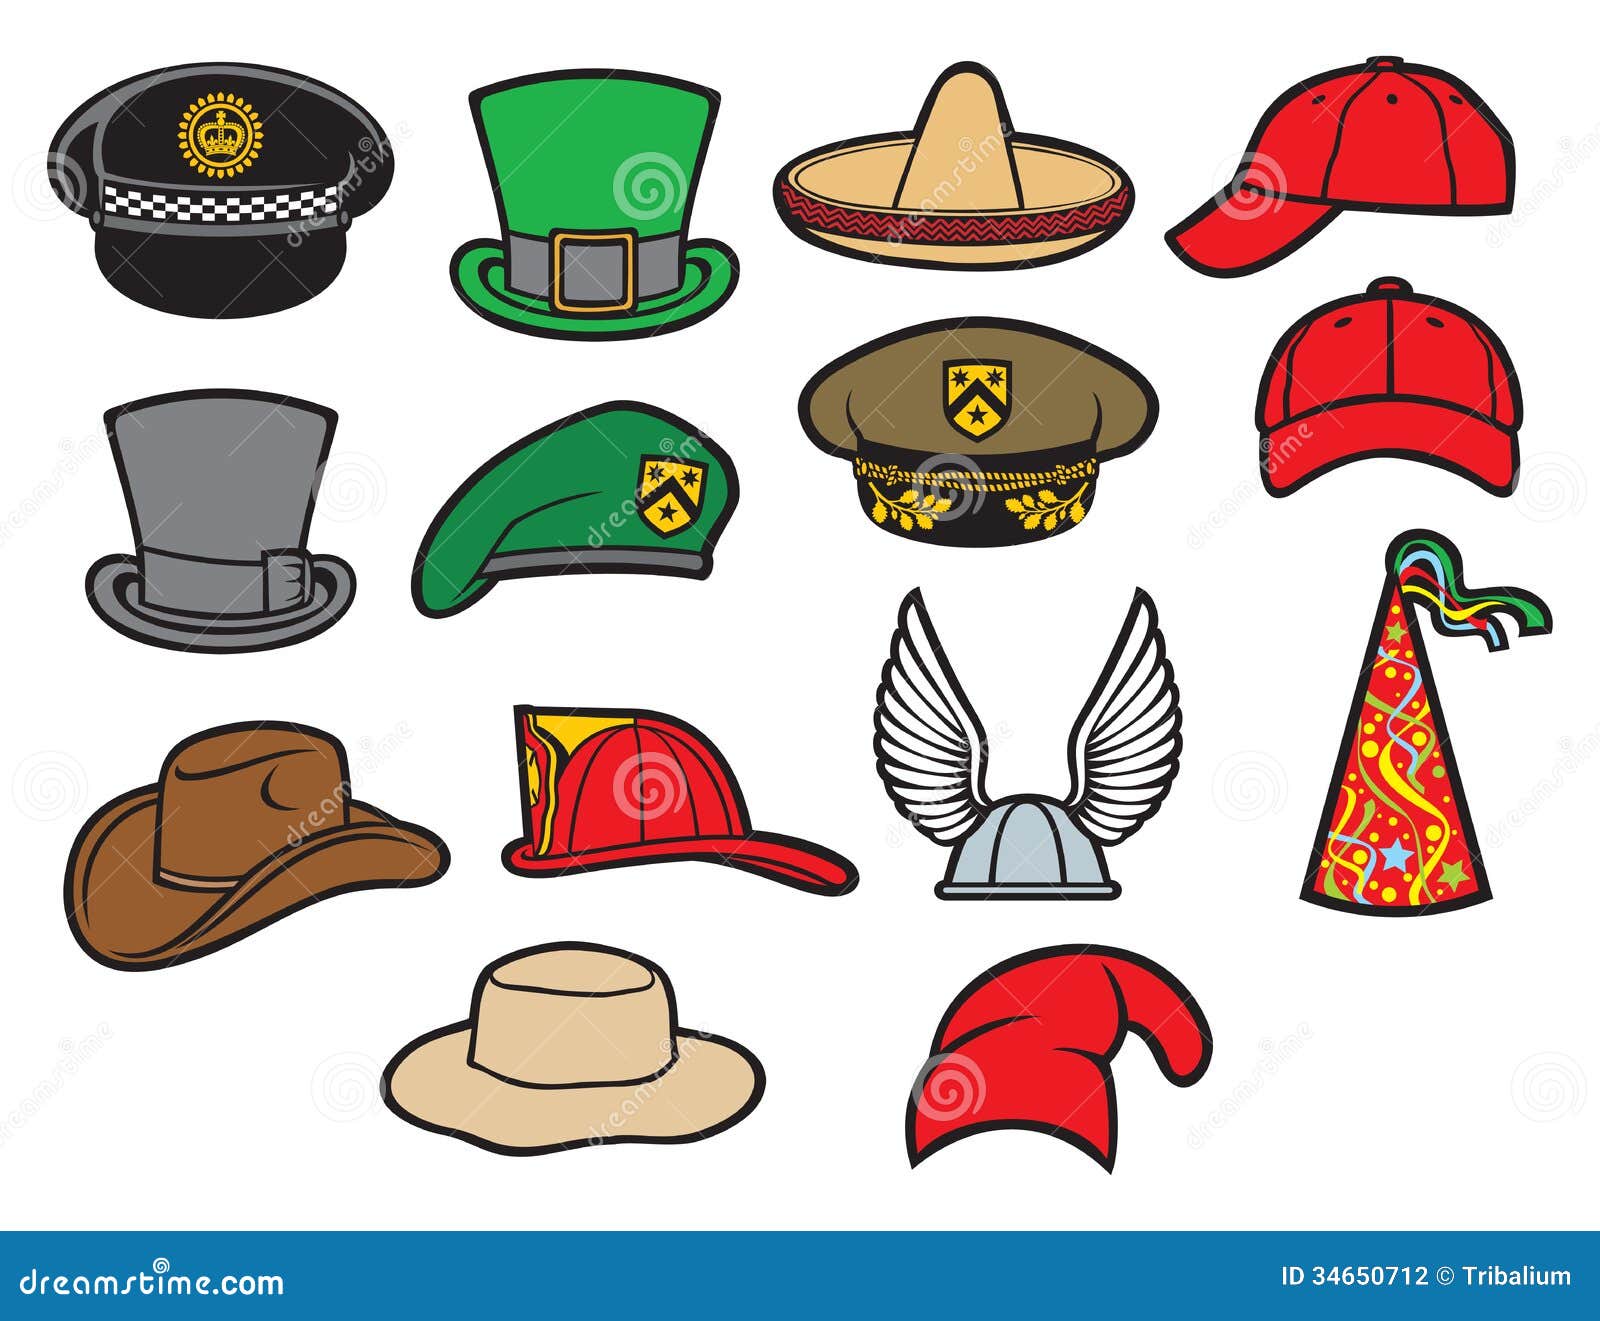 military hat clipart - photo #39